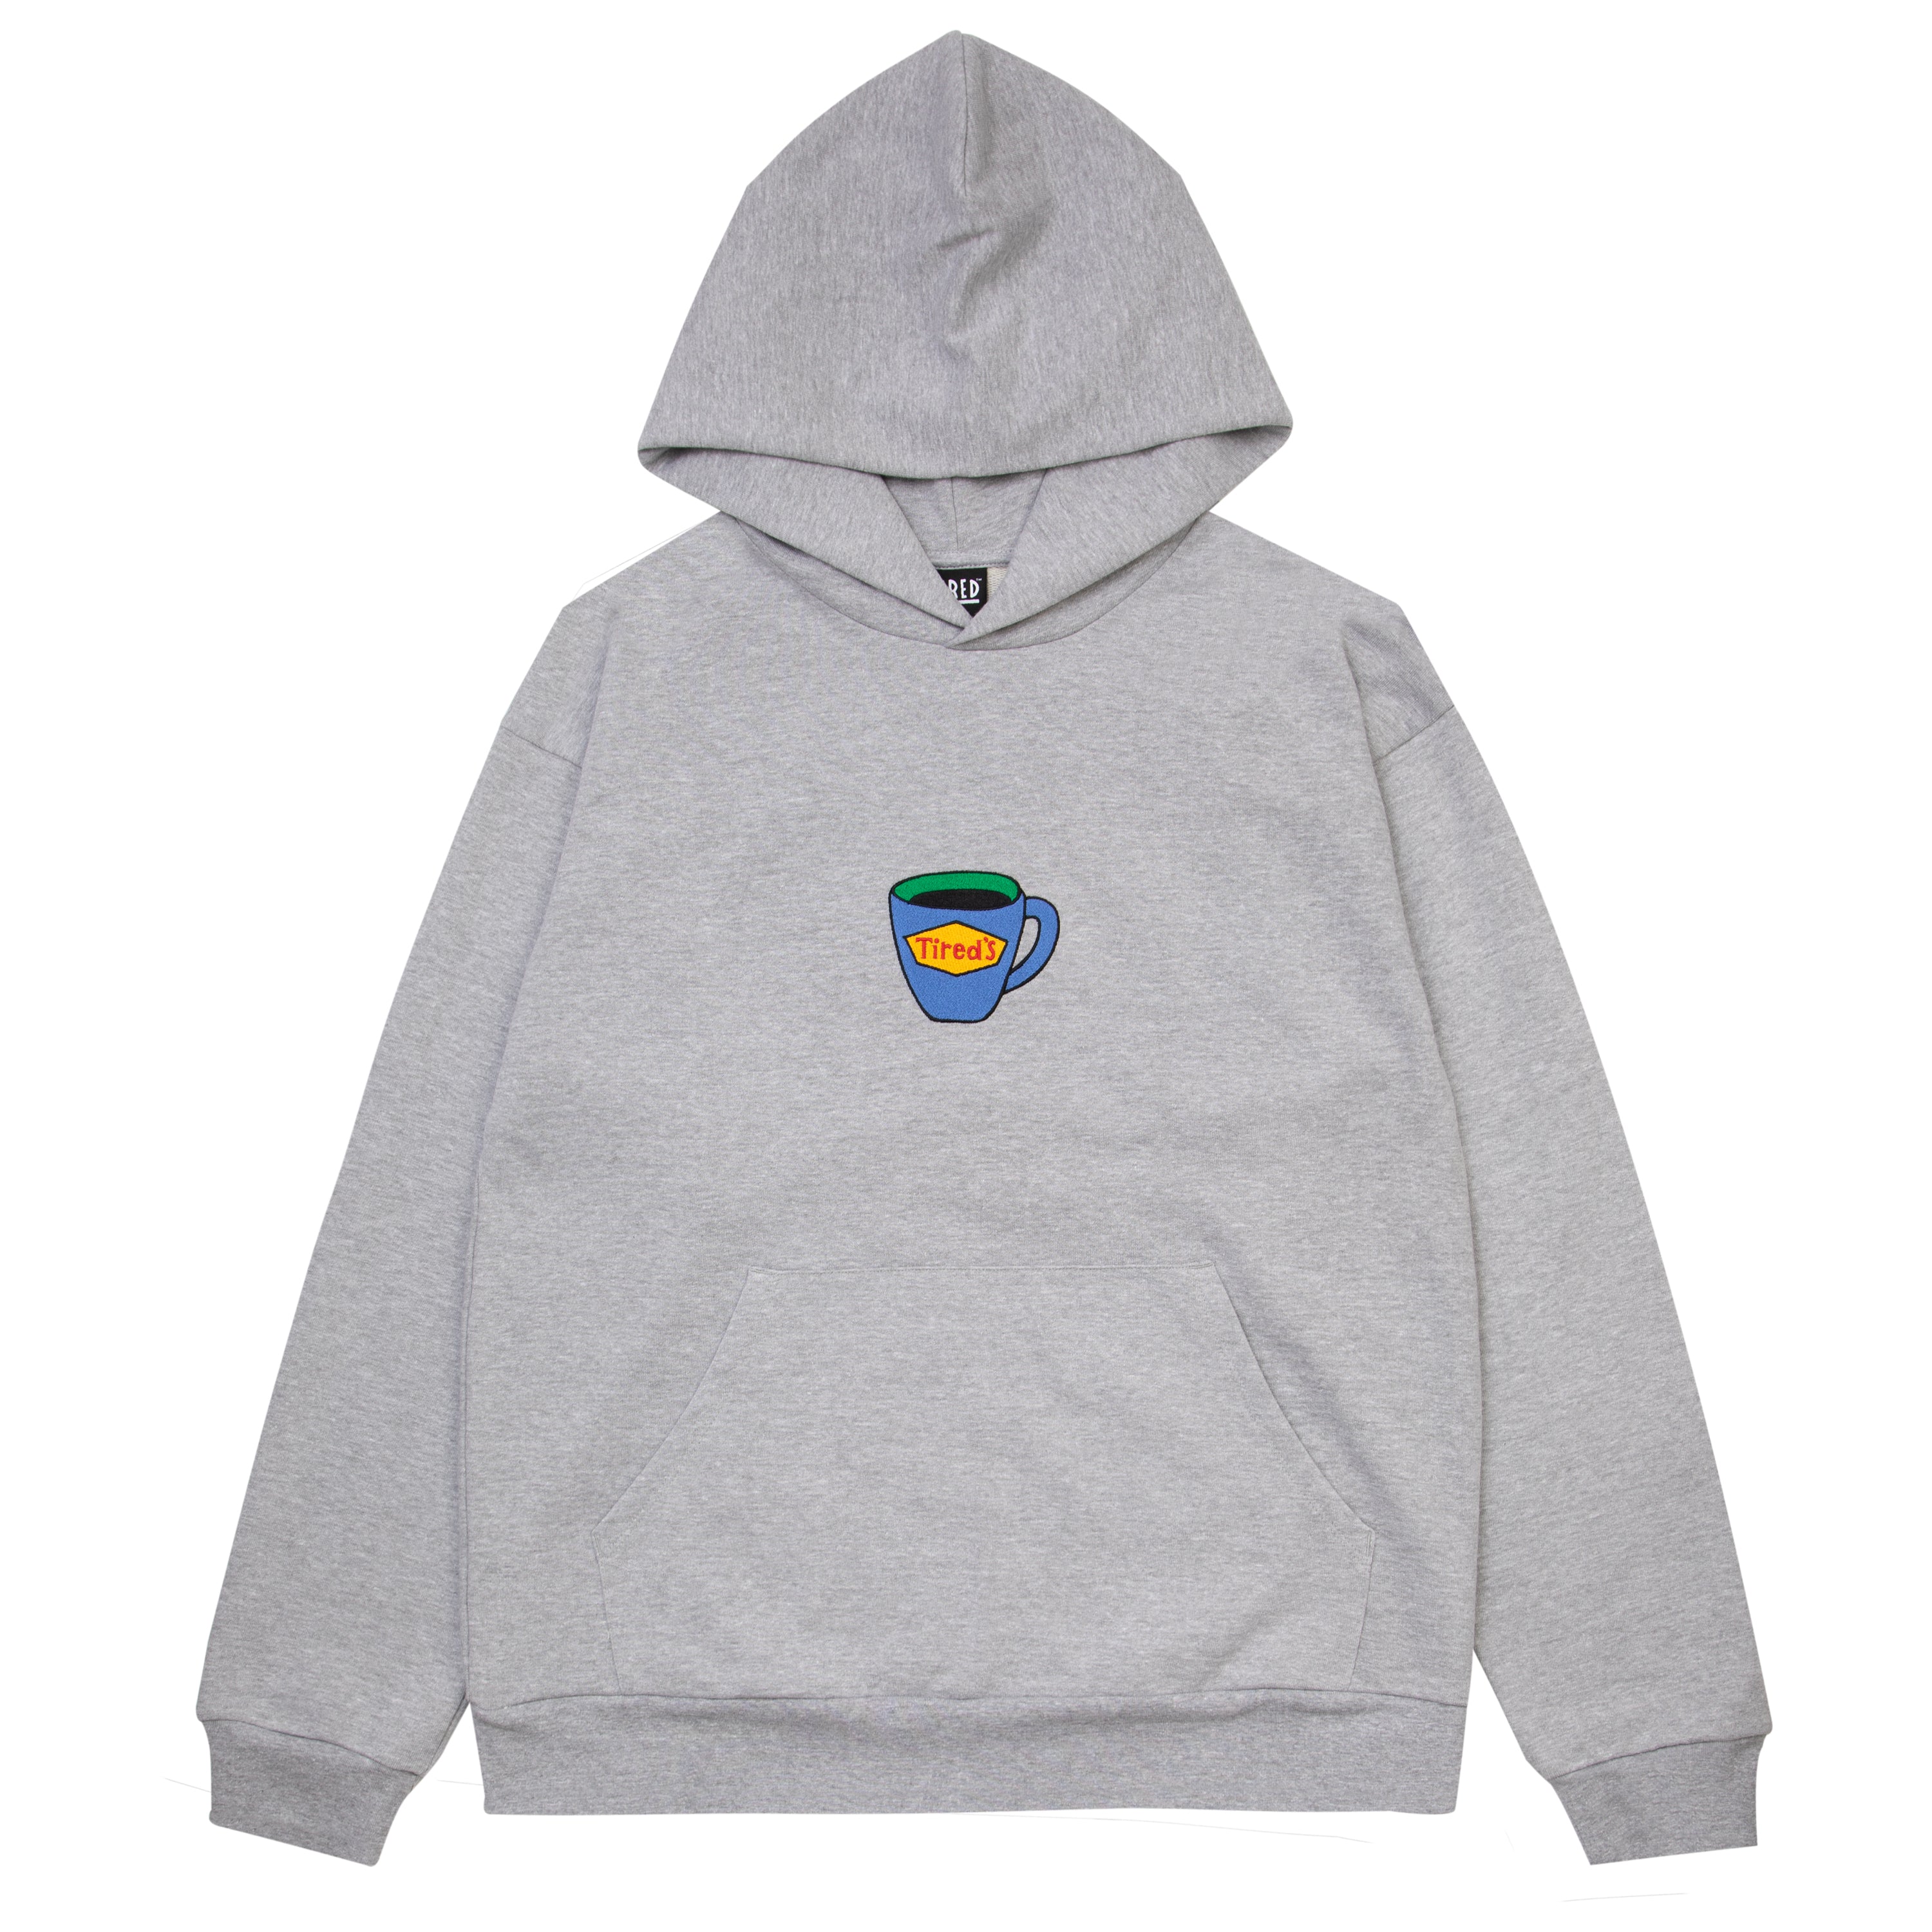 TIRED'S HOODIE HEATHER GREY – tired skateboards